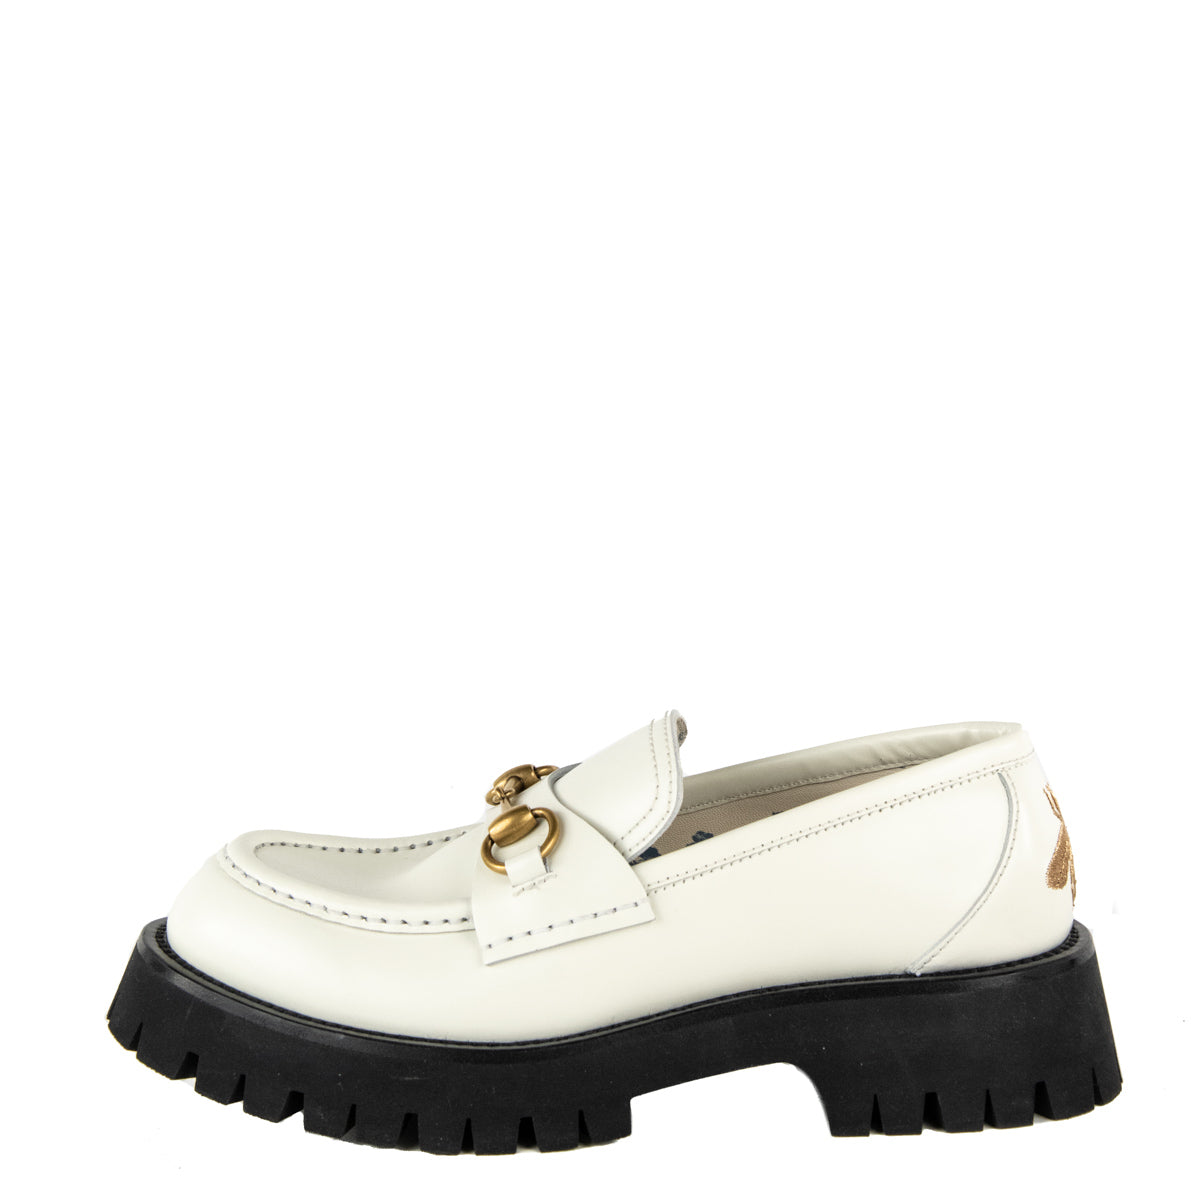 Gucci White Leather Lug Sole Horsebit Loafer Size US 8 | EU 38 - Love that Bag etc - Preowned Authentic Designer Handbags & Preloved Fashions